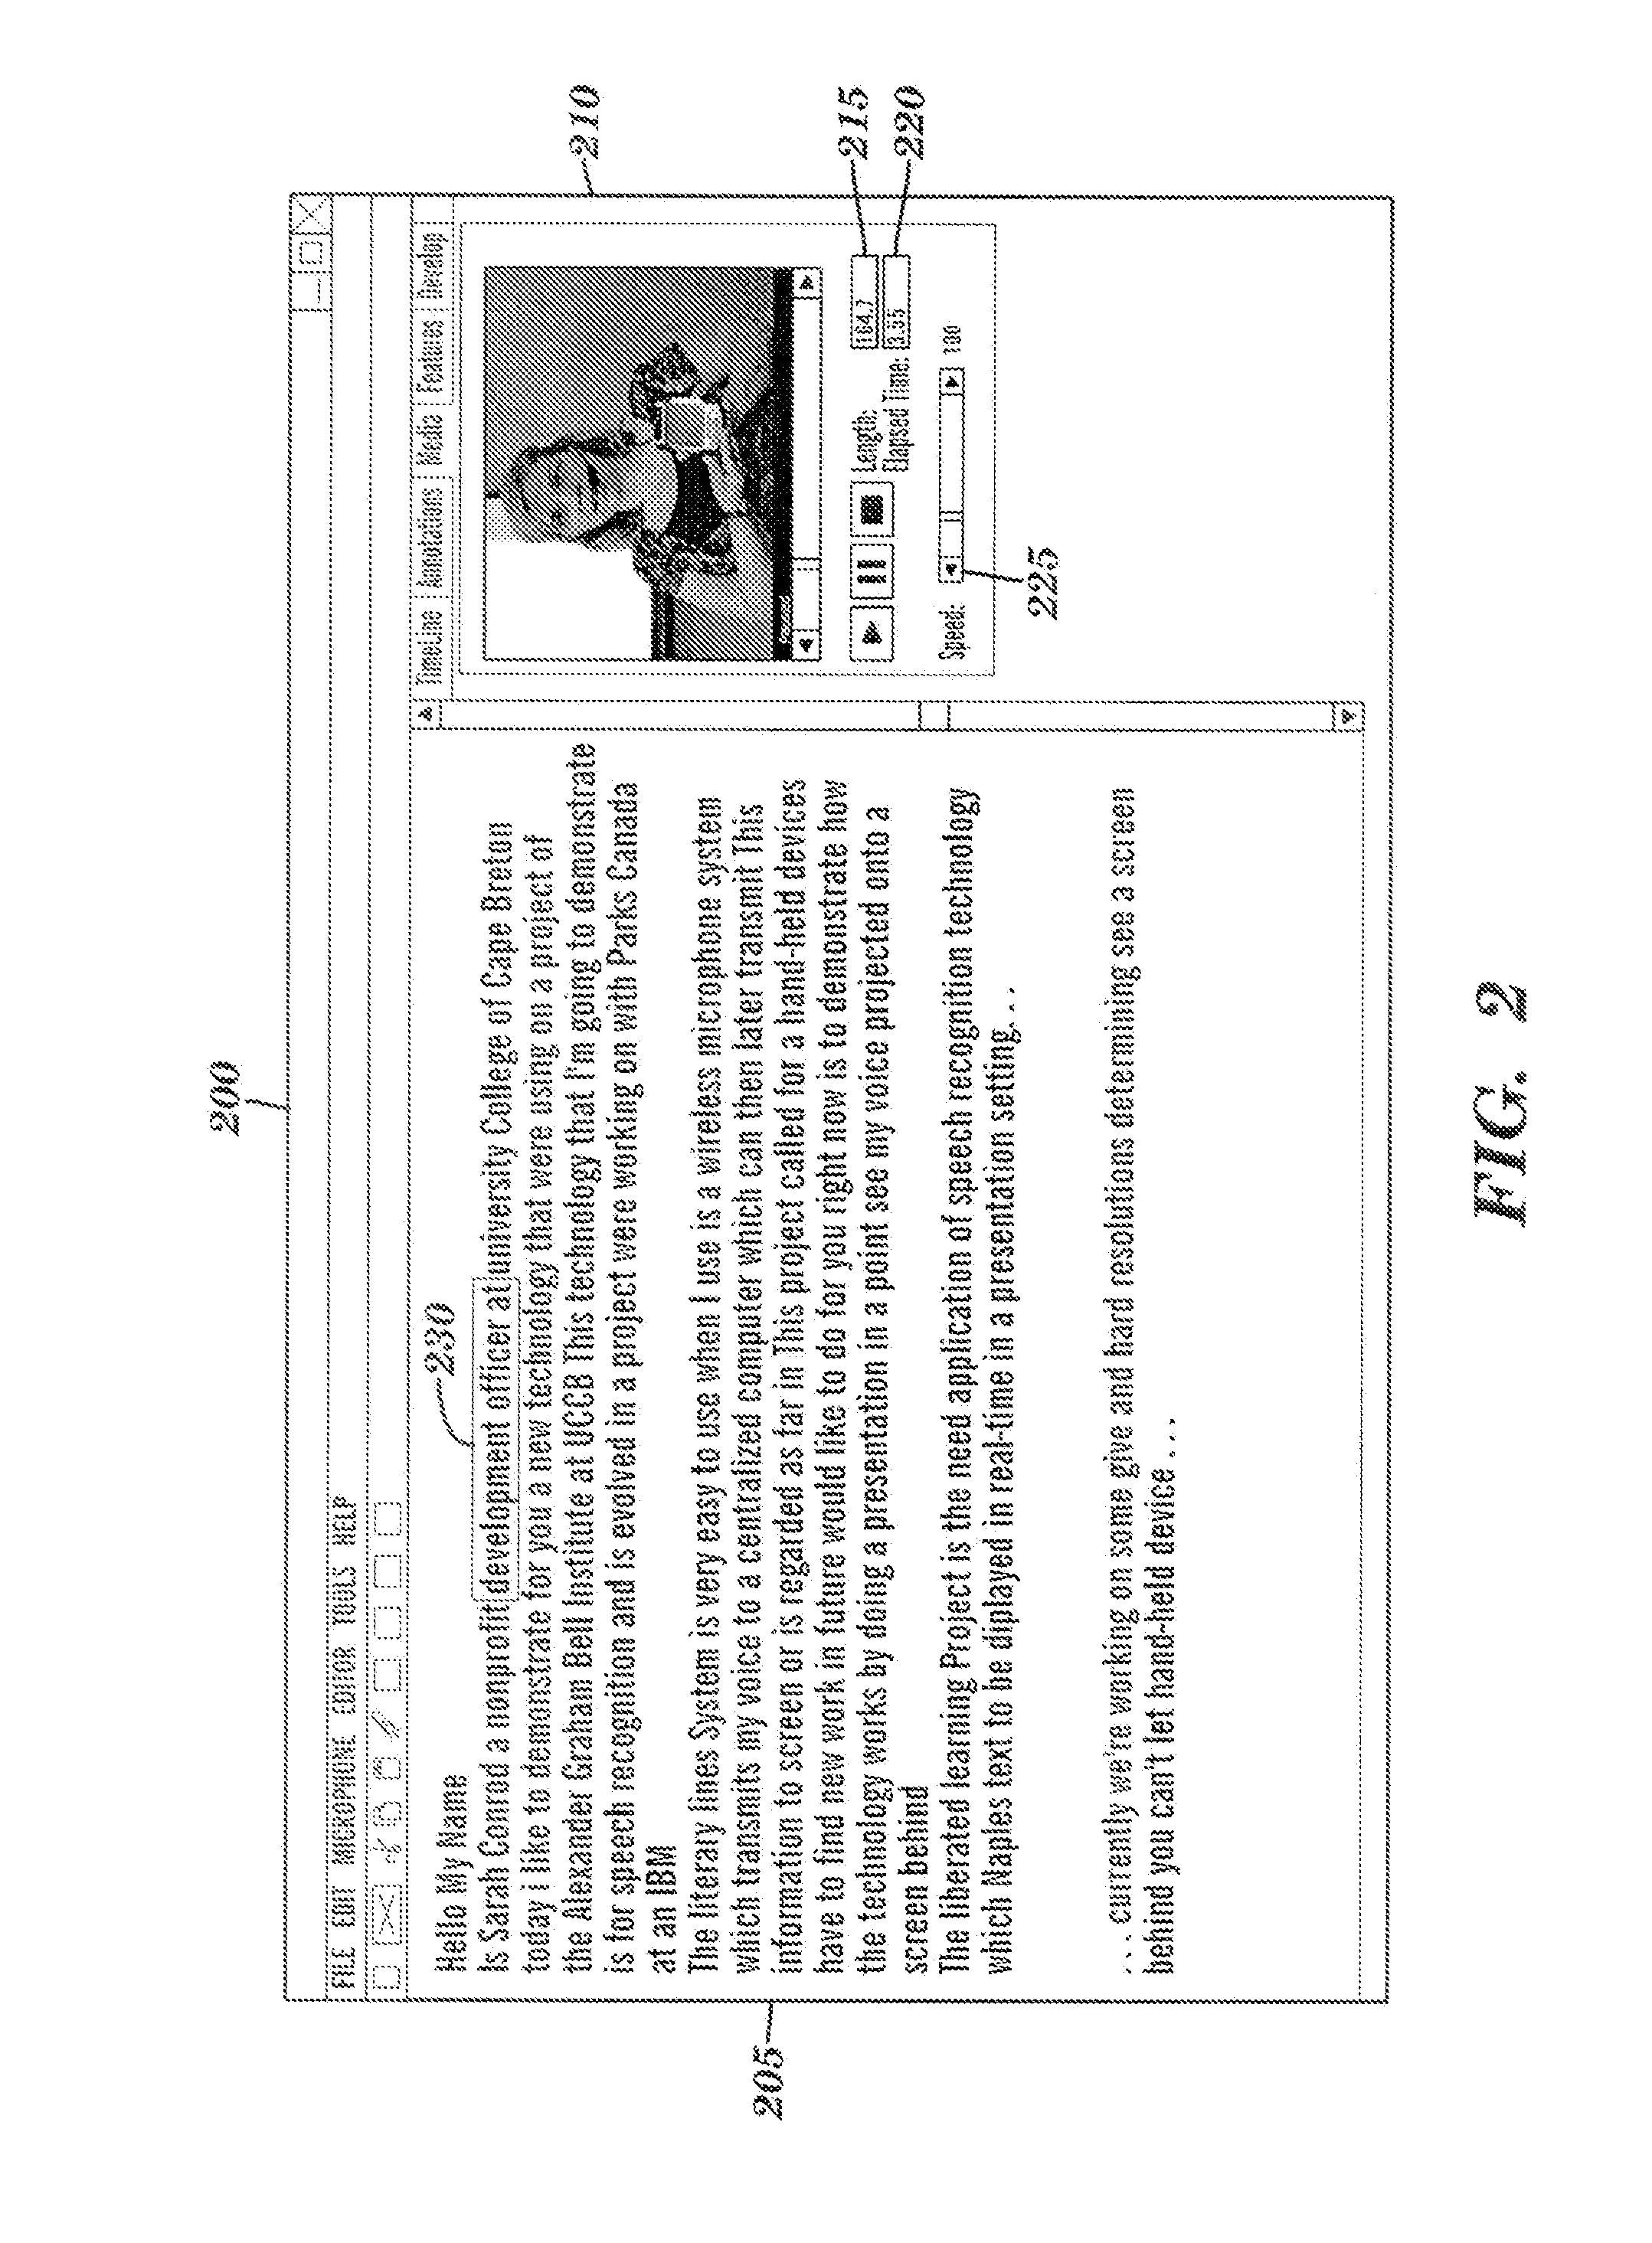 Method for the semi-automatic editing of timed and annotated data